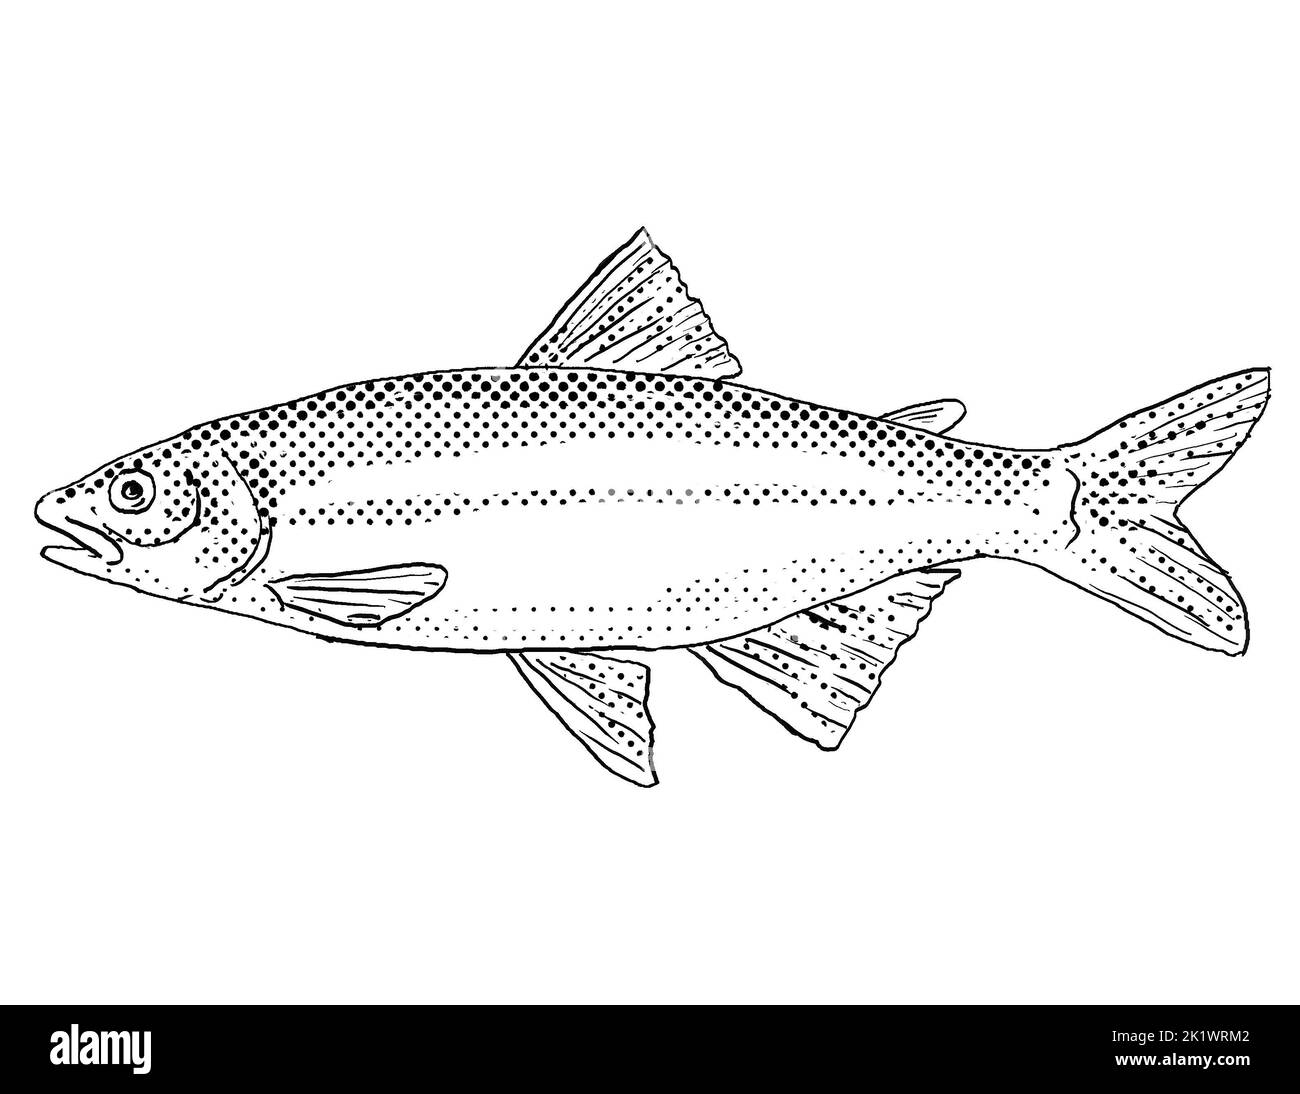 Cartoon style line drawing of a satinfin shiner or Cyprinella analostana a freshwater fish endemic to North America with halftone dots shading on isol Stock Photo